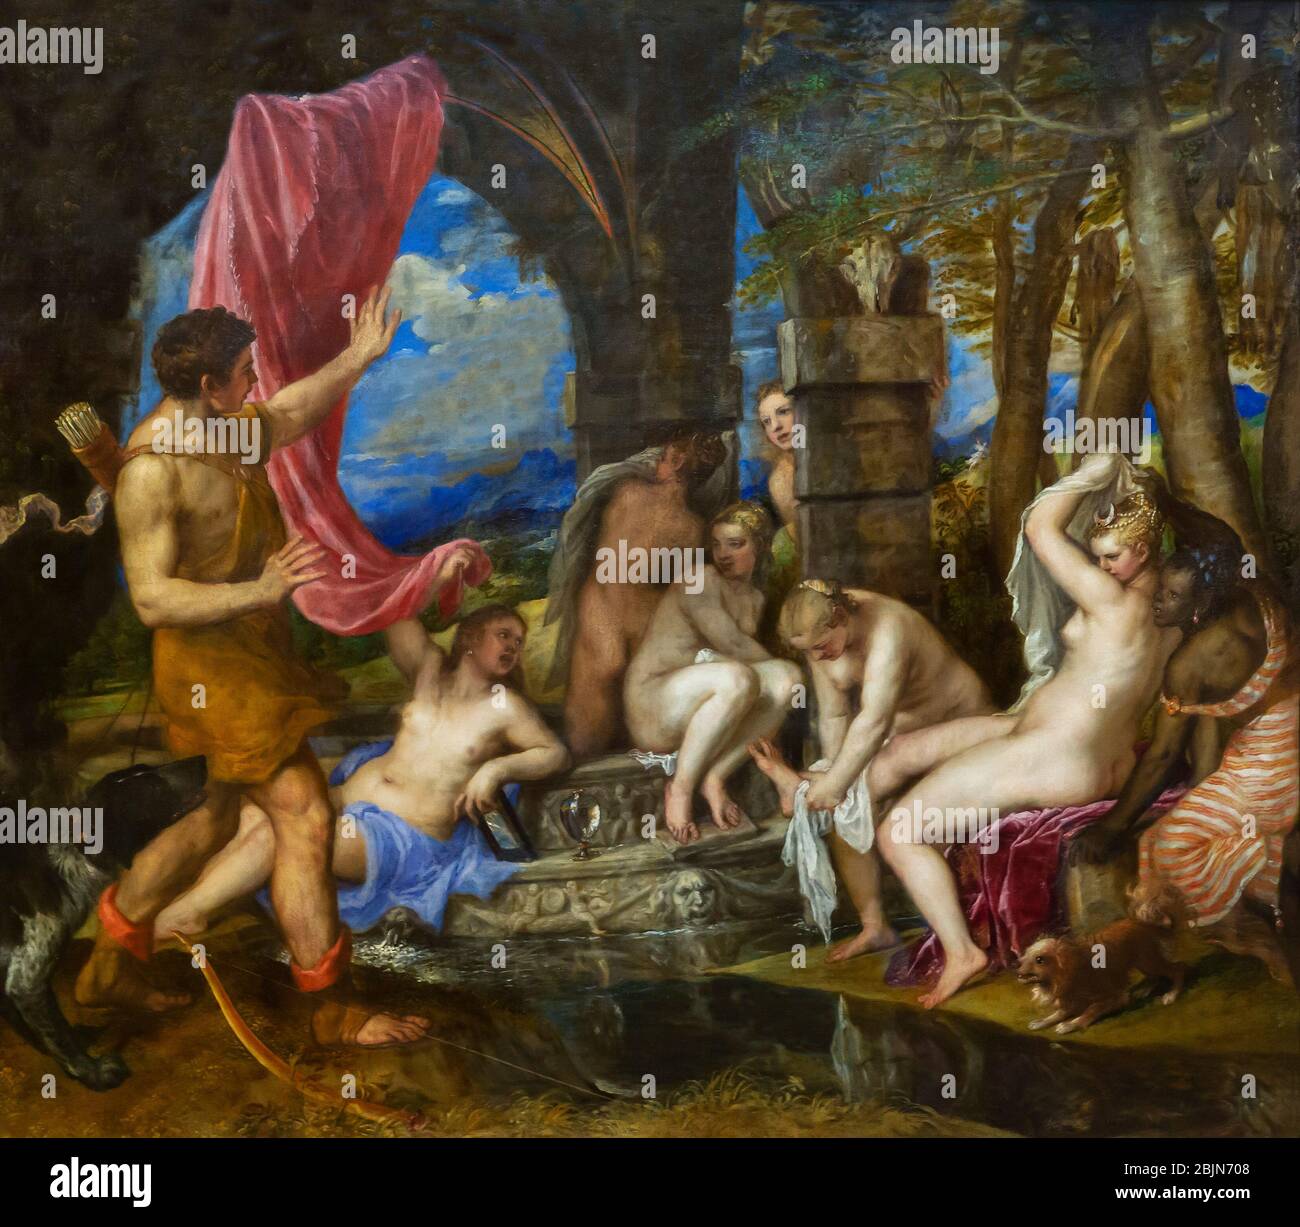 Diana and Actaeon, Titian, 1556-1559, Stock Photo